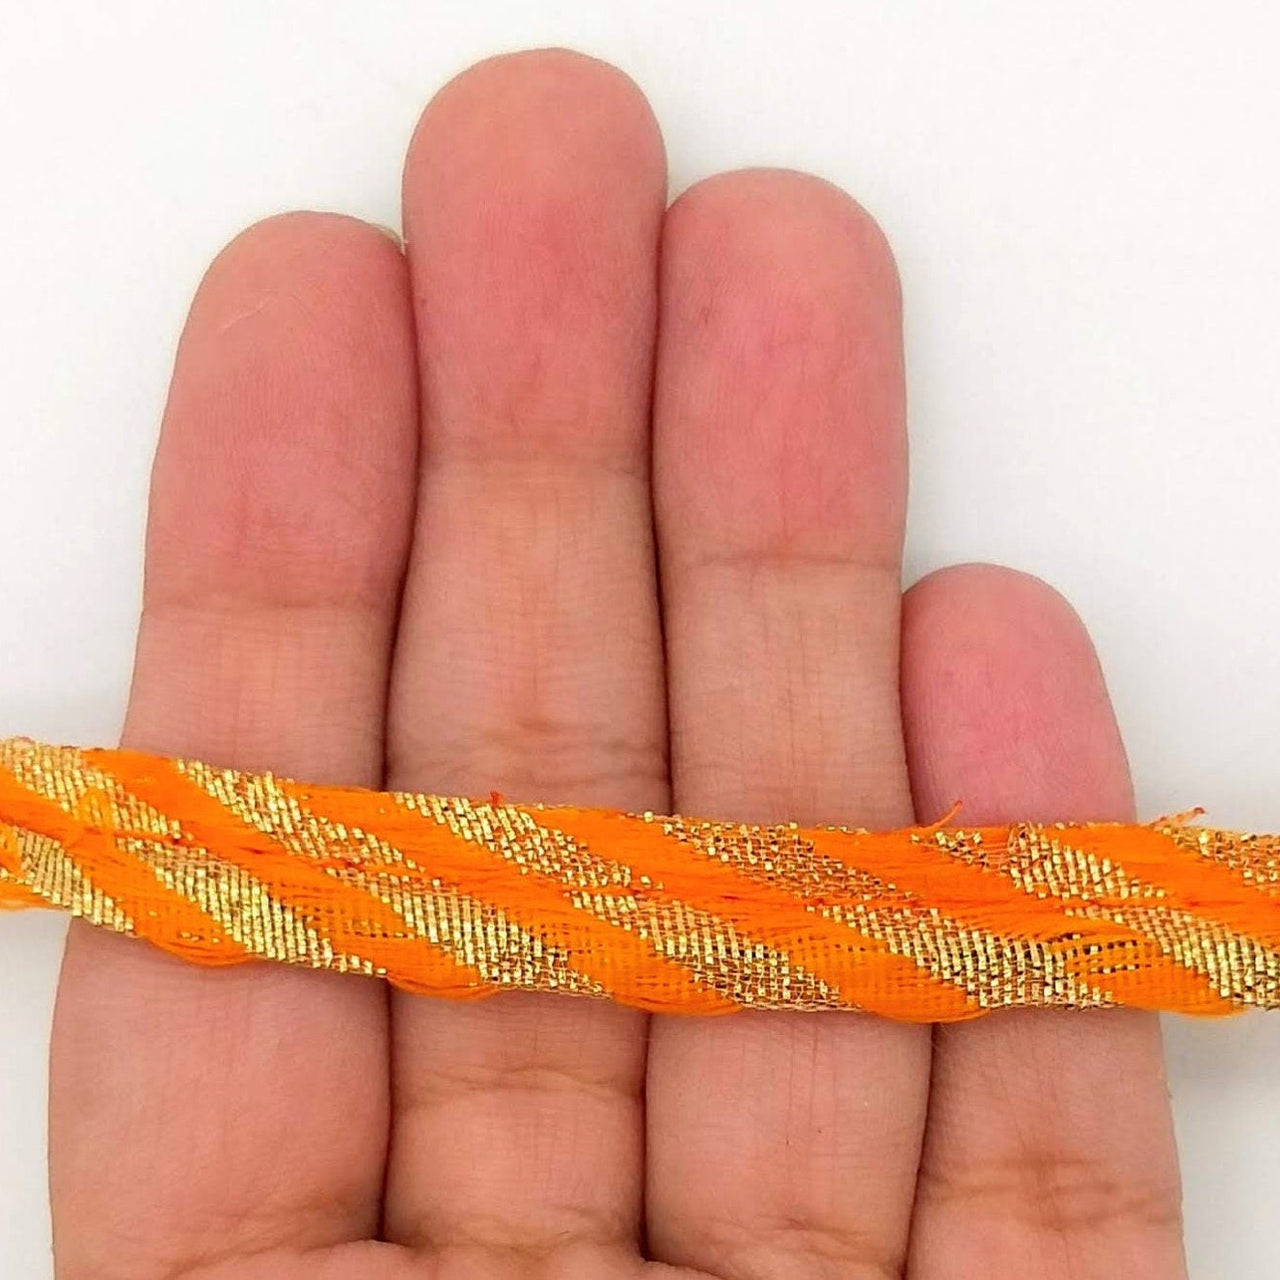 Orange And Gold Stripes Piping Cord Trim, Approx. 10 mm wide, 9 Yards Trim